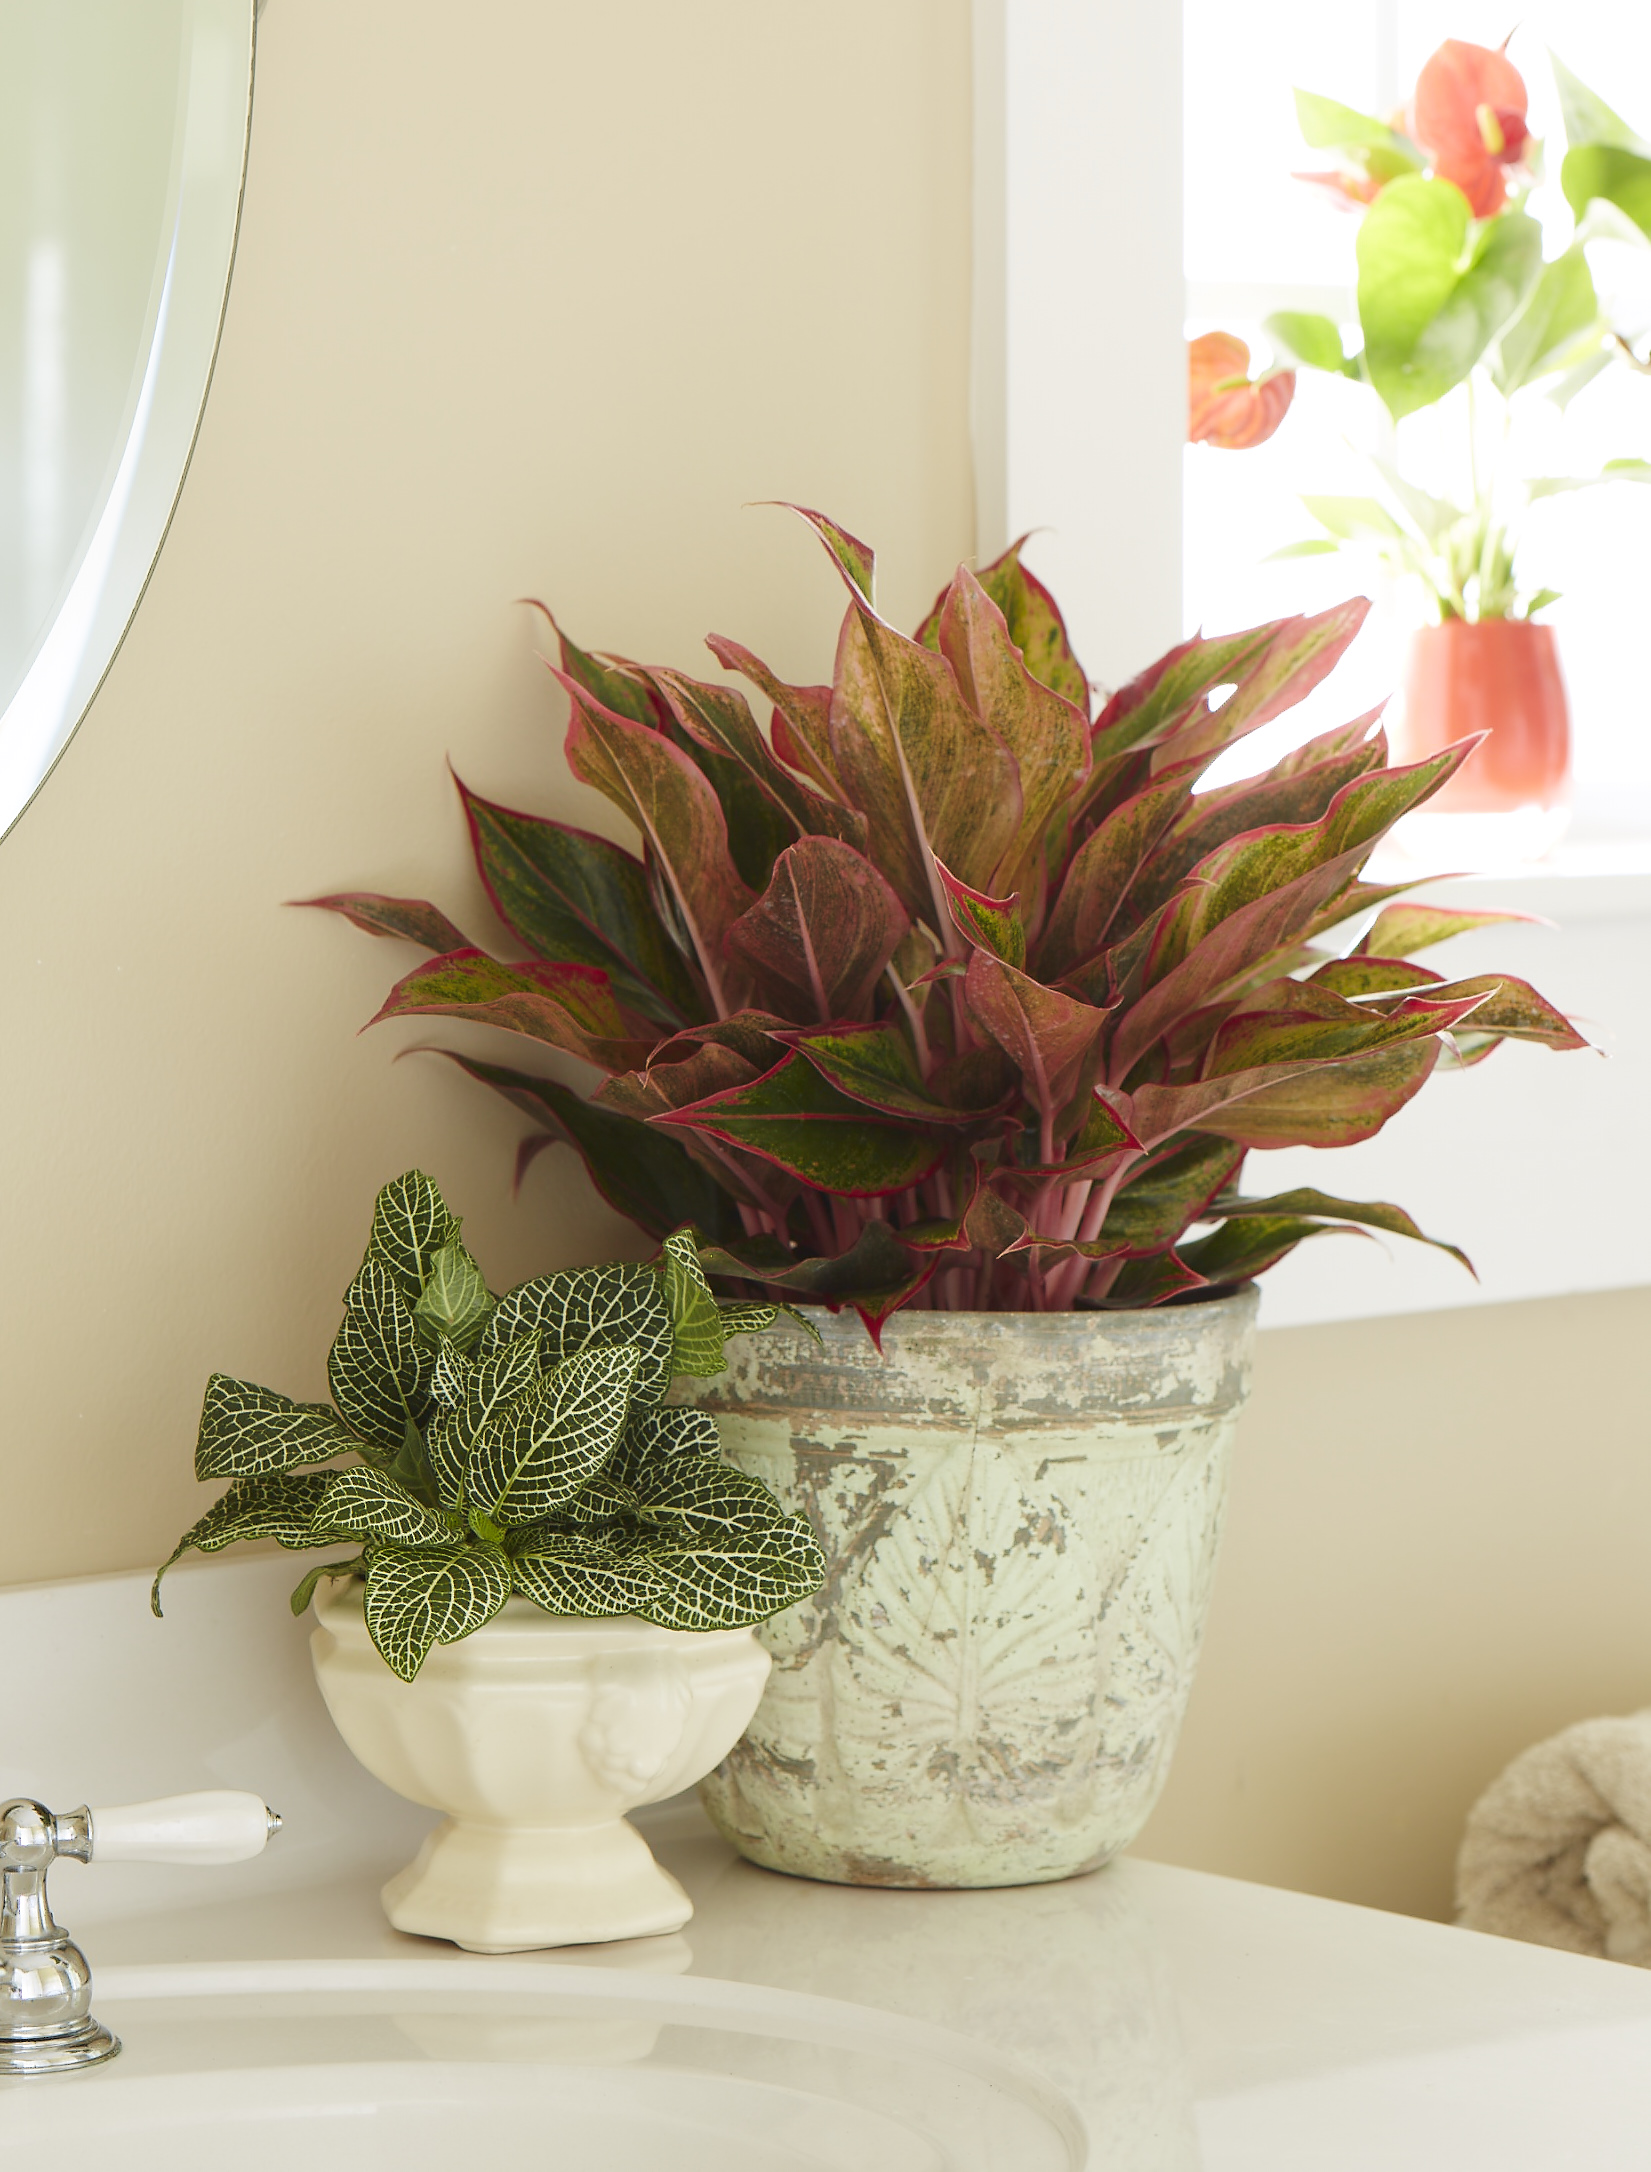 With just a little care, houseplants can thrive, brightening winter days.